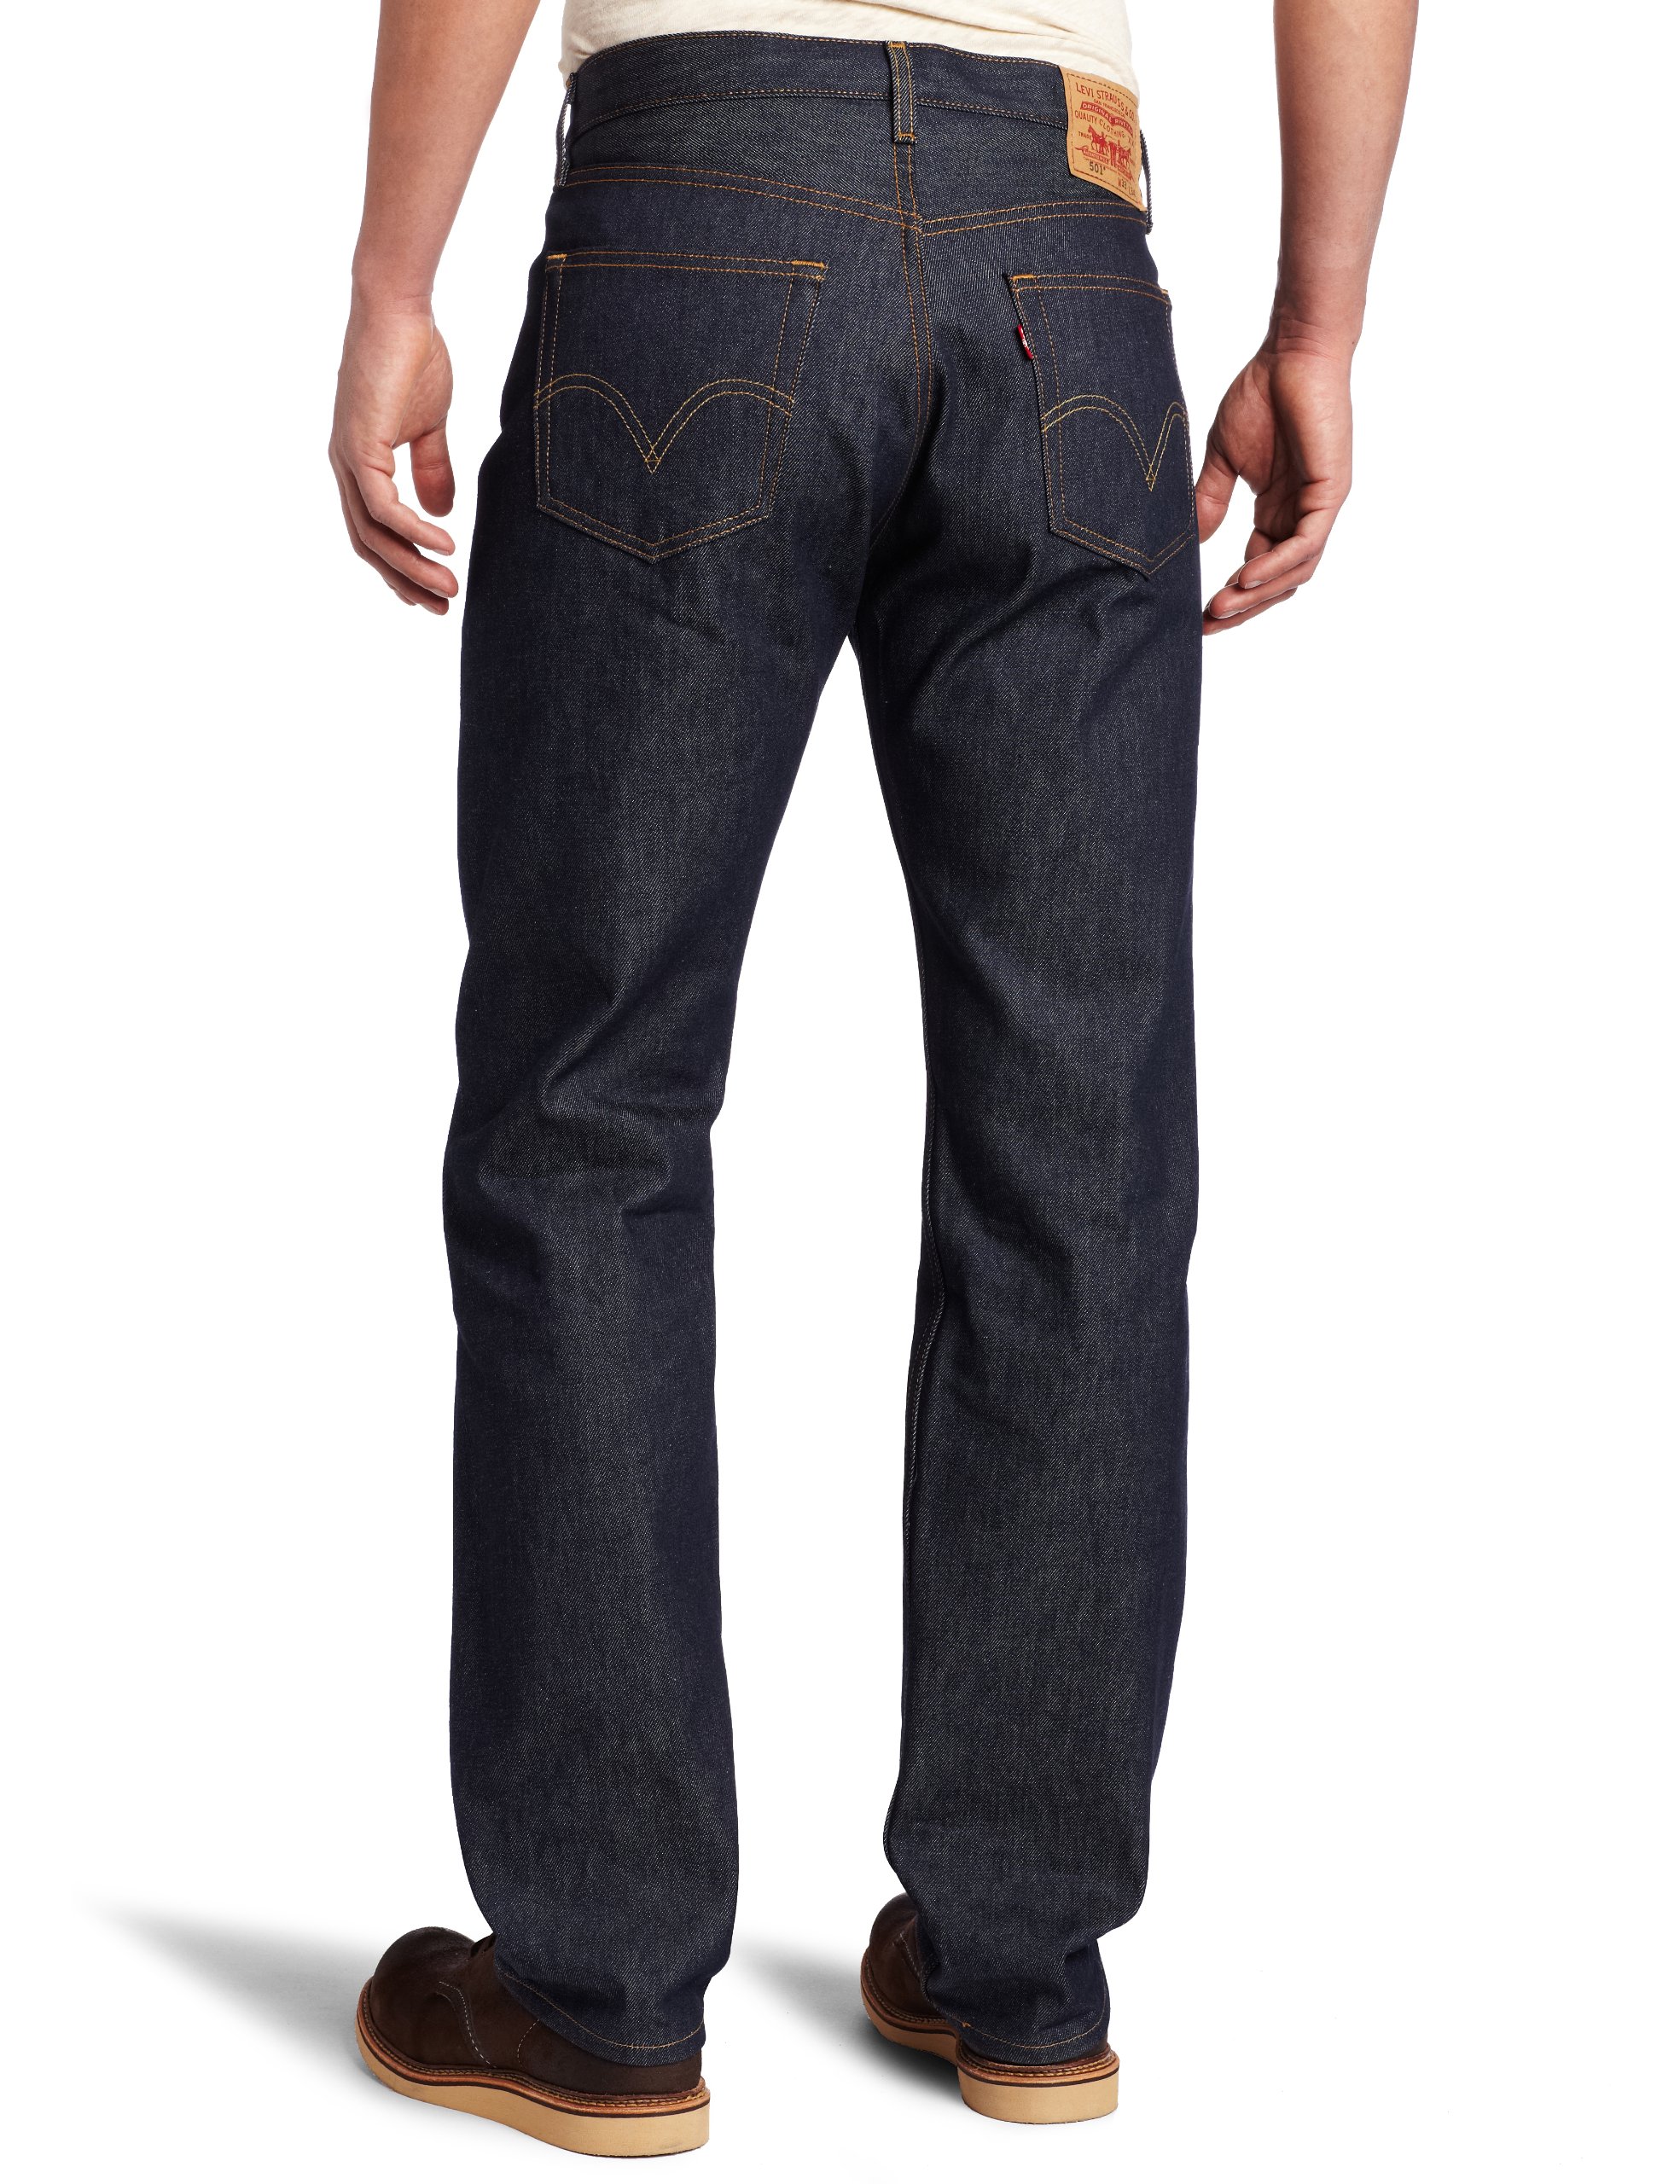 Levi's Men's 501 Original Style Shrink-to-fit Jeans (Regular and Big & Tall)